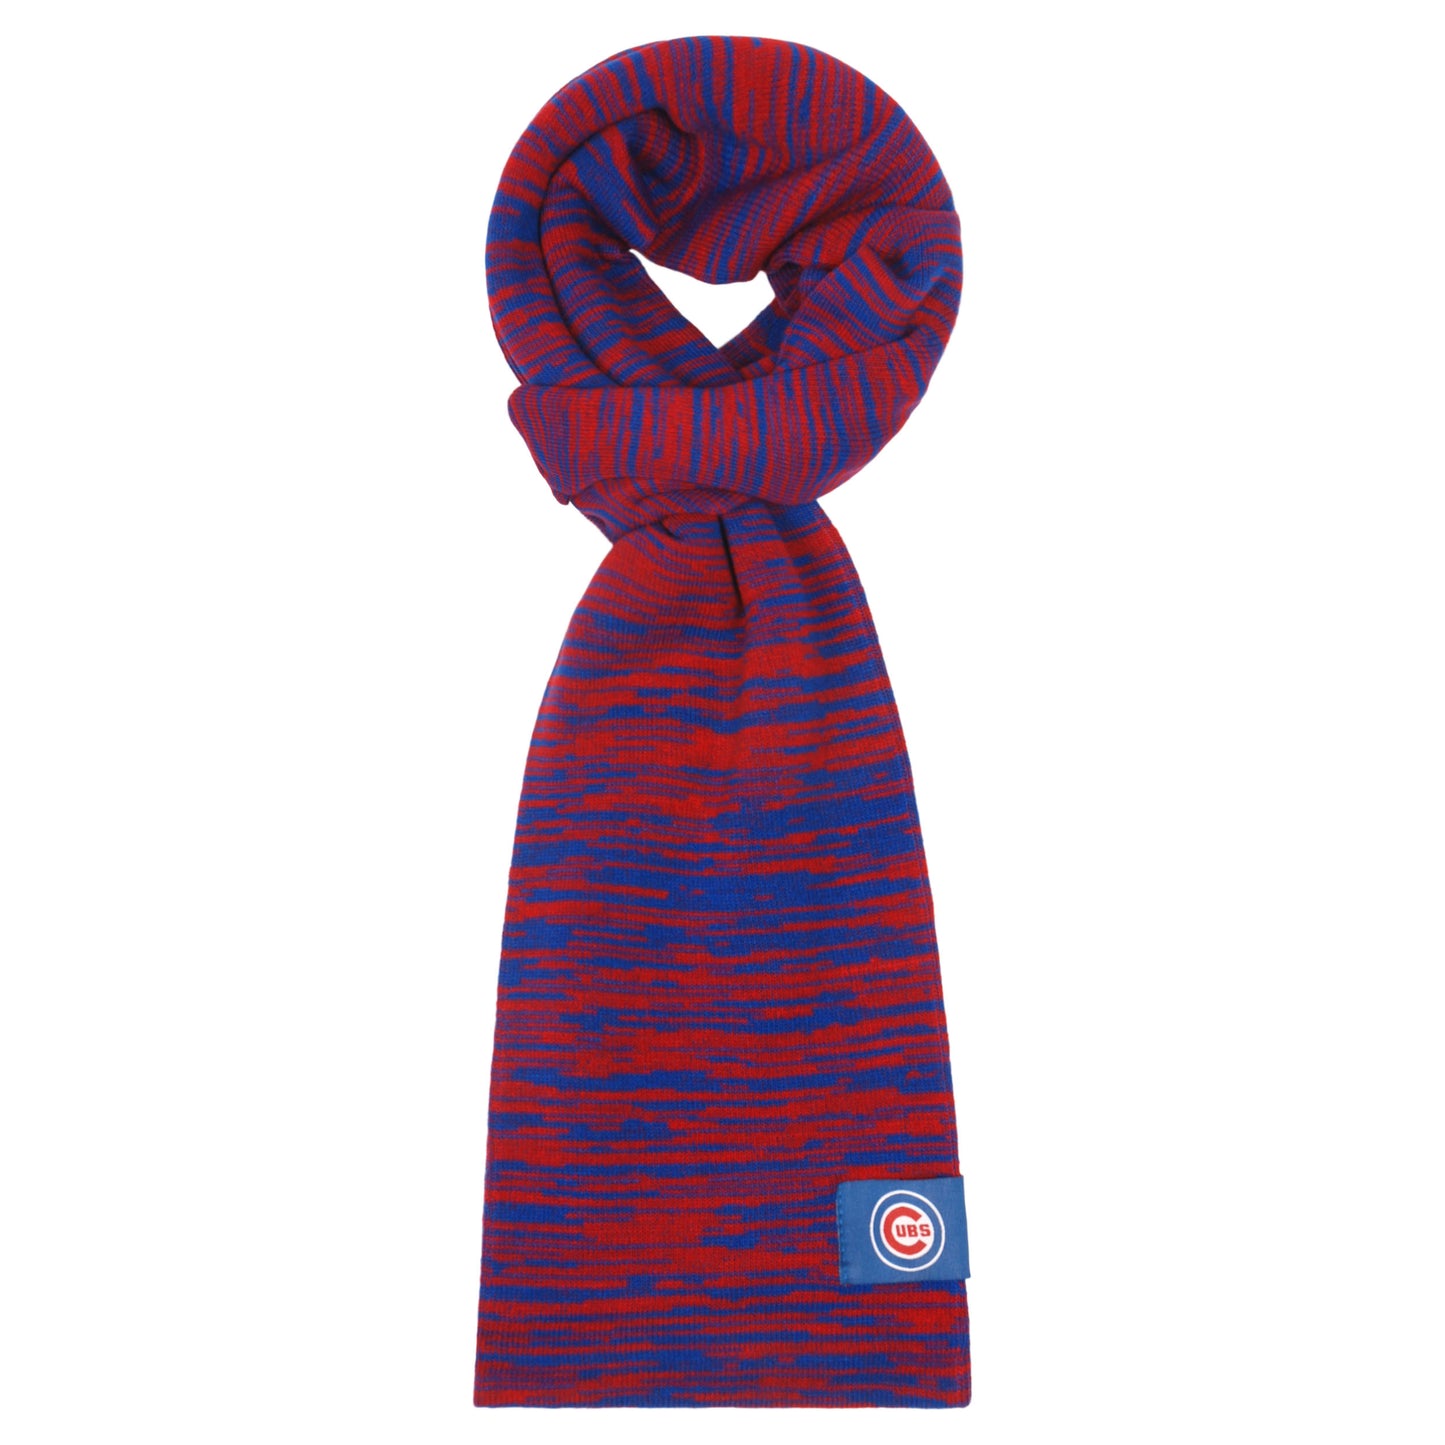 Cubs women's colorblend scarf